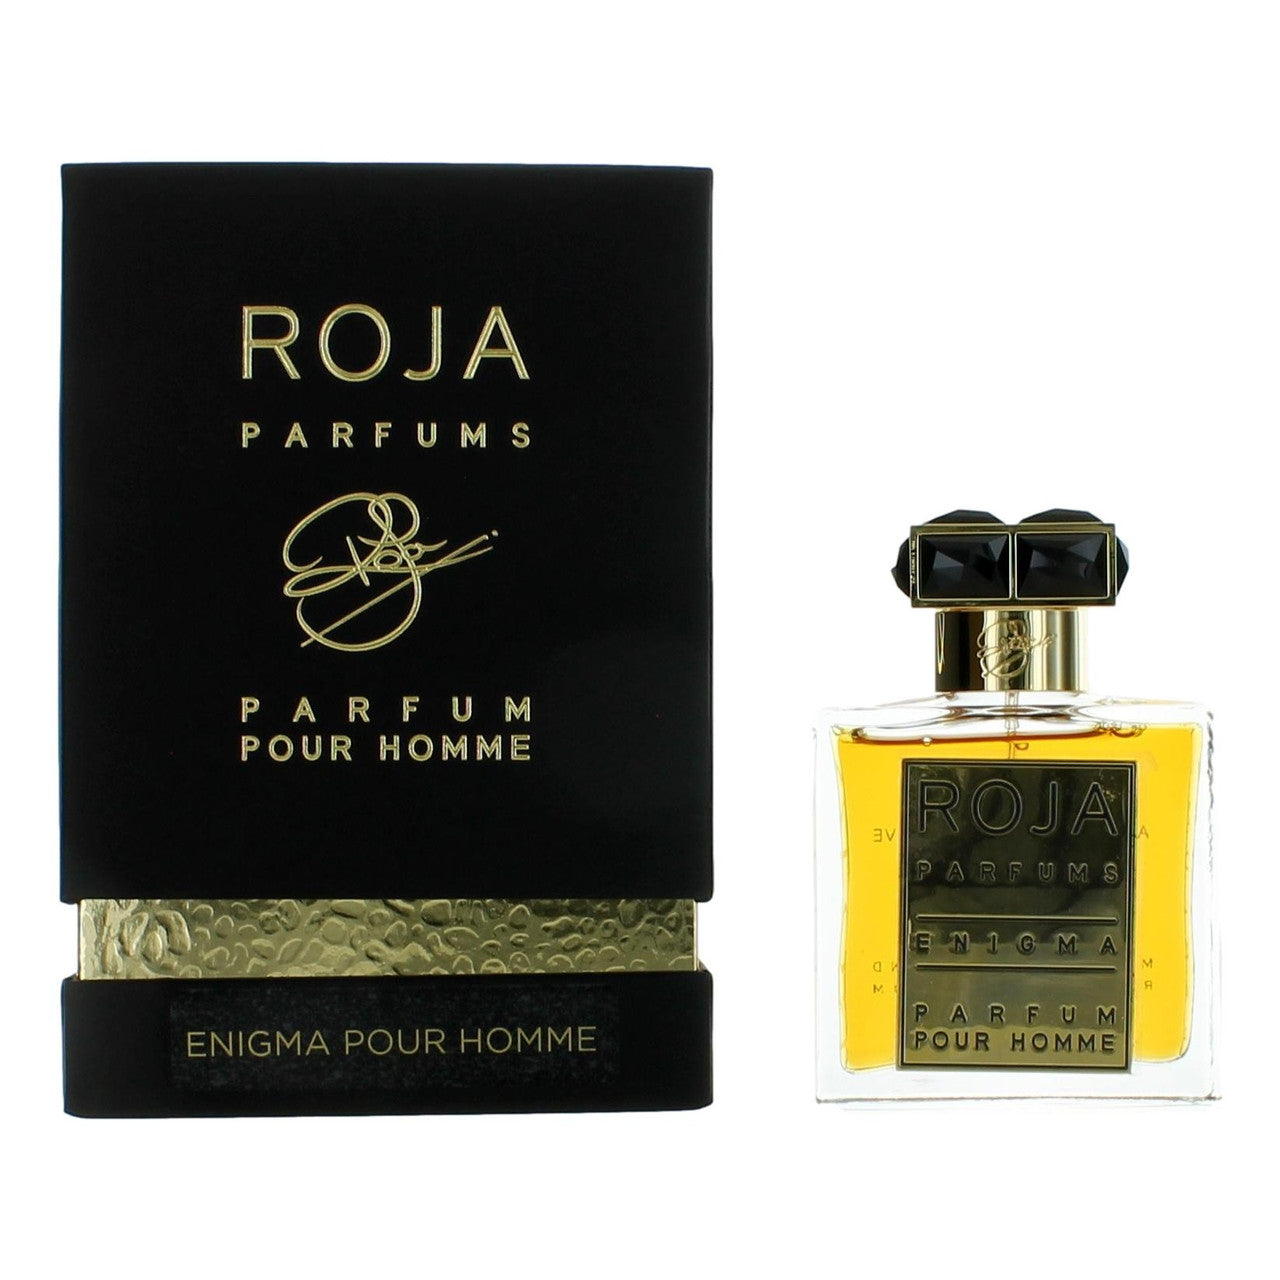 1.7 oz bottle of Enigma Pour Homme by Roja Parfums